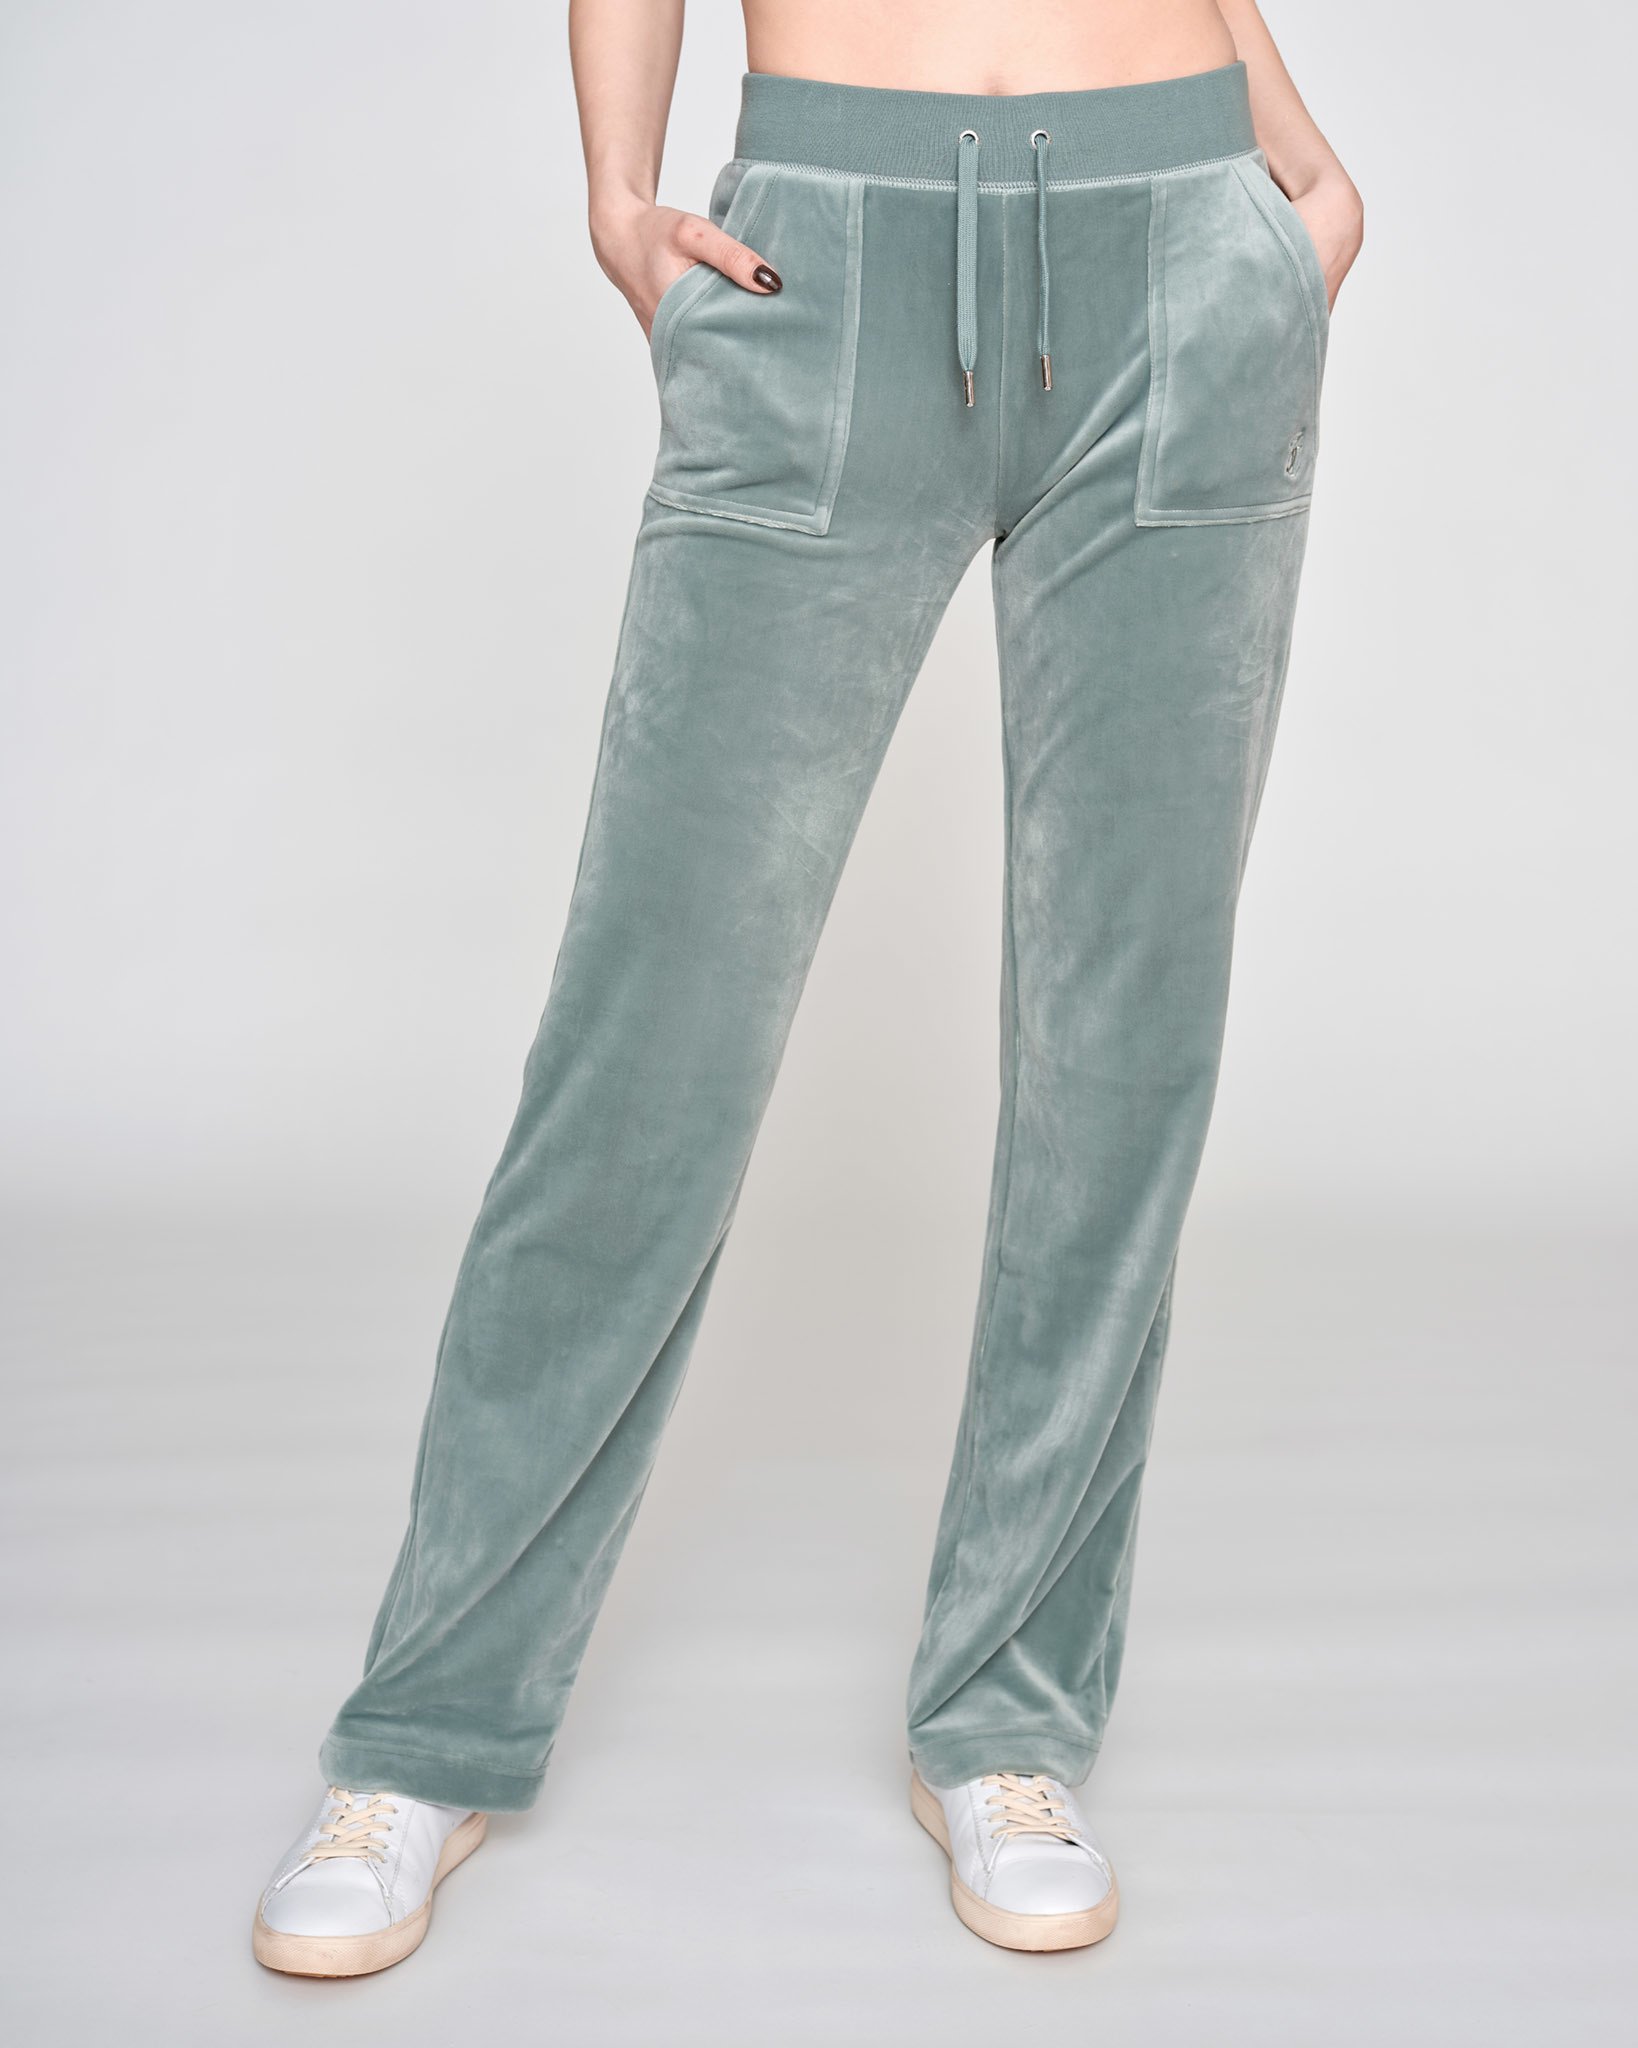 juicy couture pants with back pockets